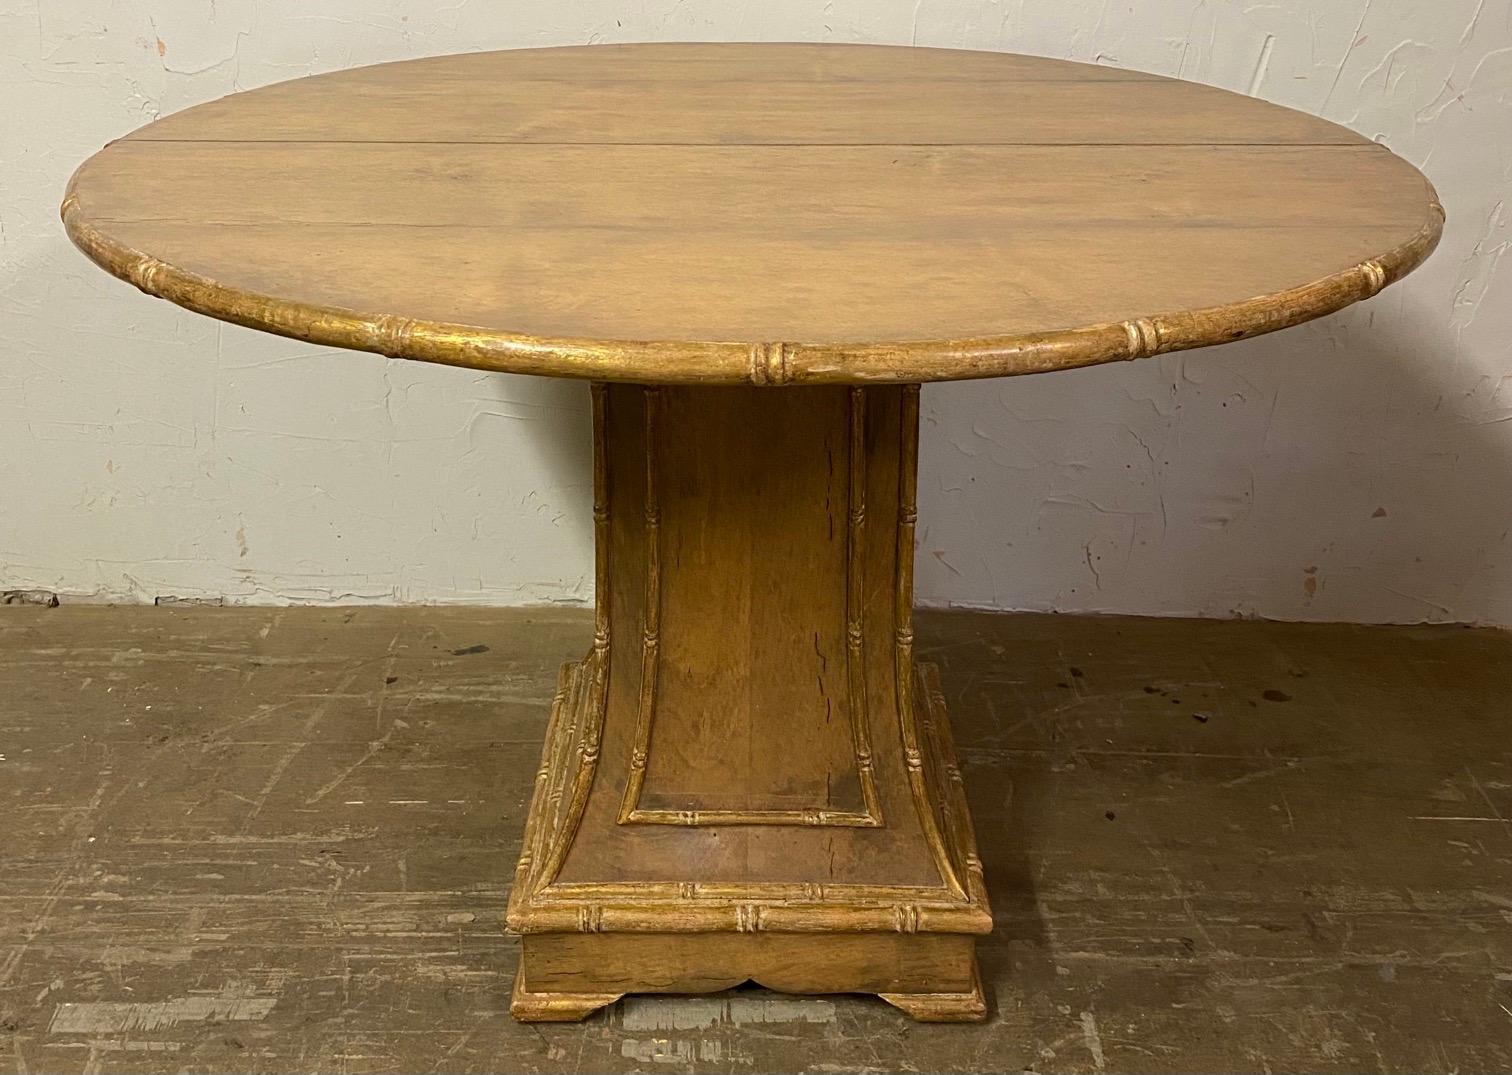 Wonderfully stylish round pedestal table with gold gilt edging and supporting column decorated with carved faux bamboo detailing. Paint has worn to a degree giving it wonderful patina which gives it added casual charm and elegance.
Table can make a